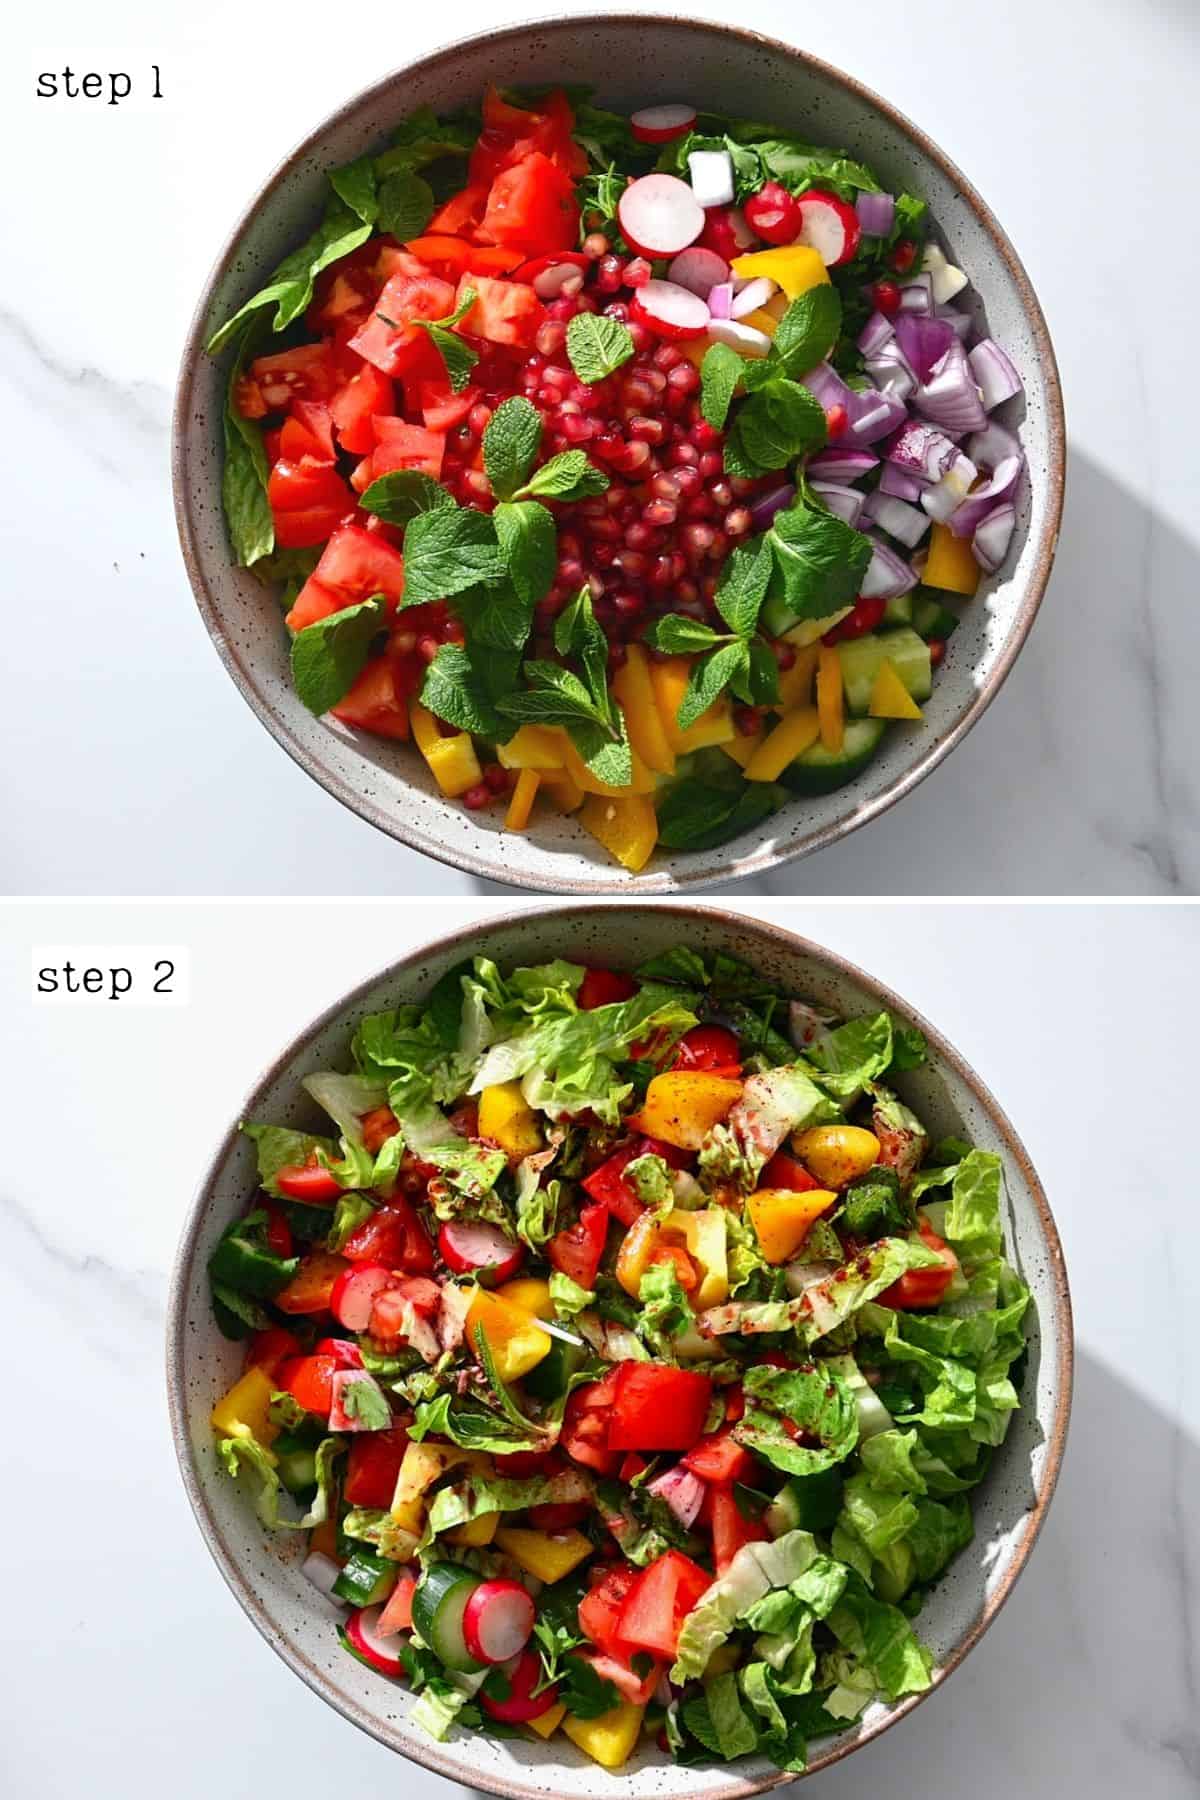 Steps for mixing fattoush salad